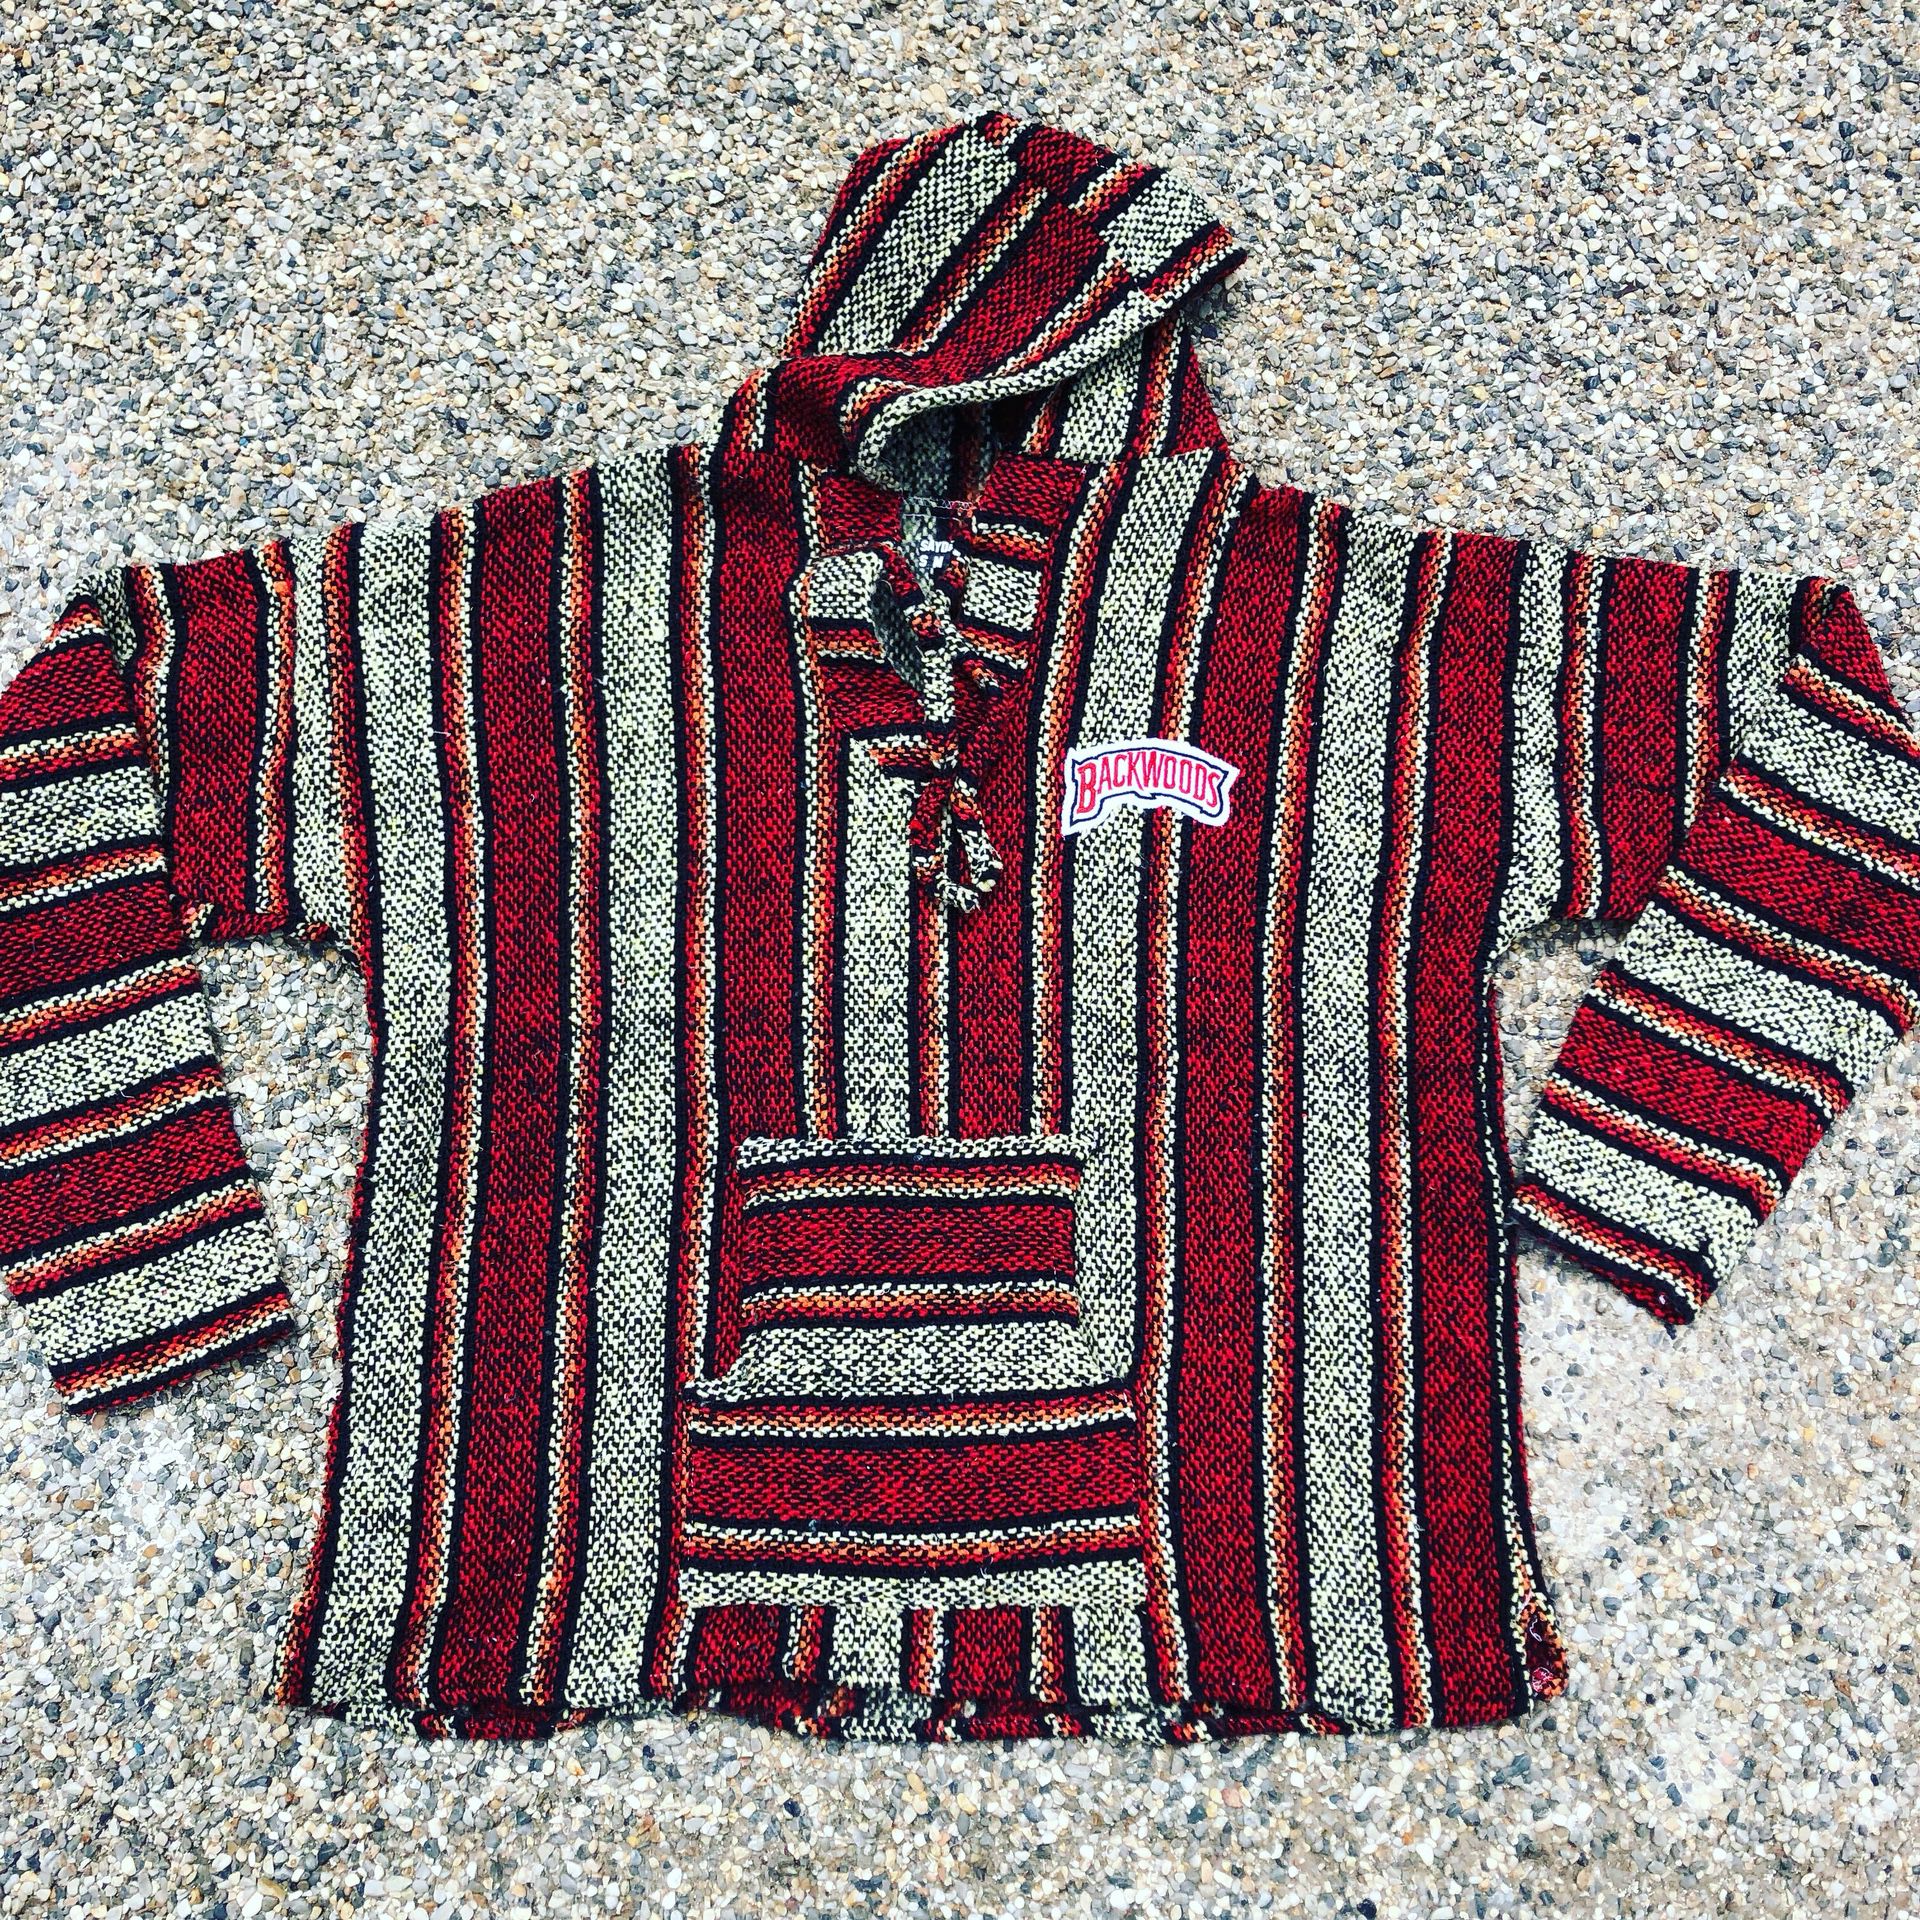 Hoodie poncho backwoods patchwork size large